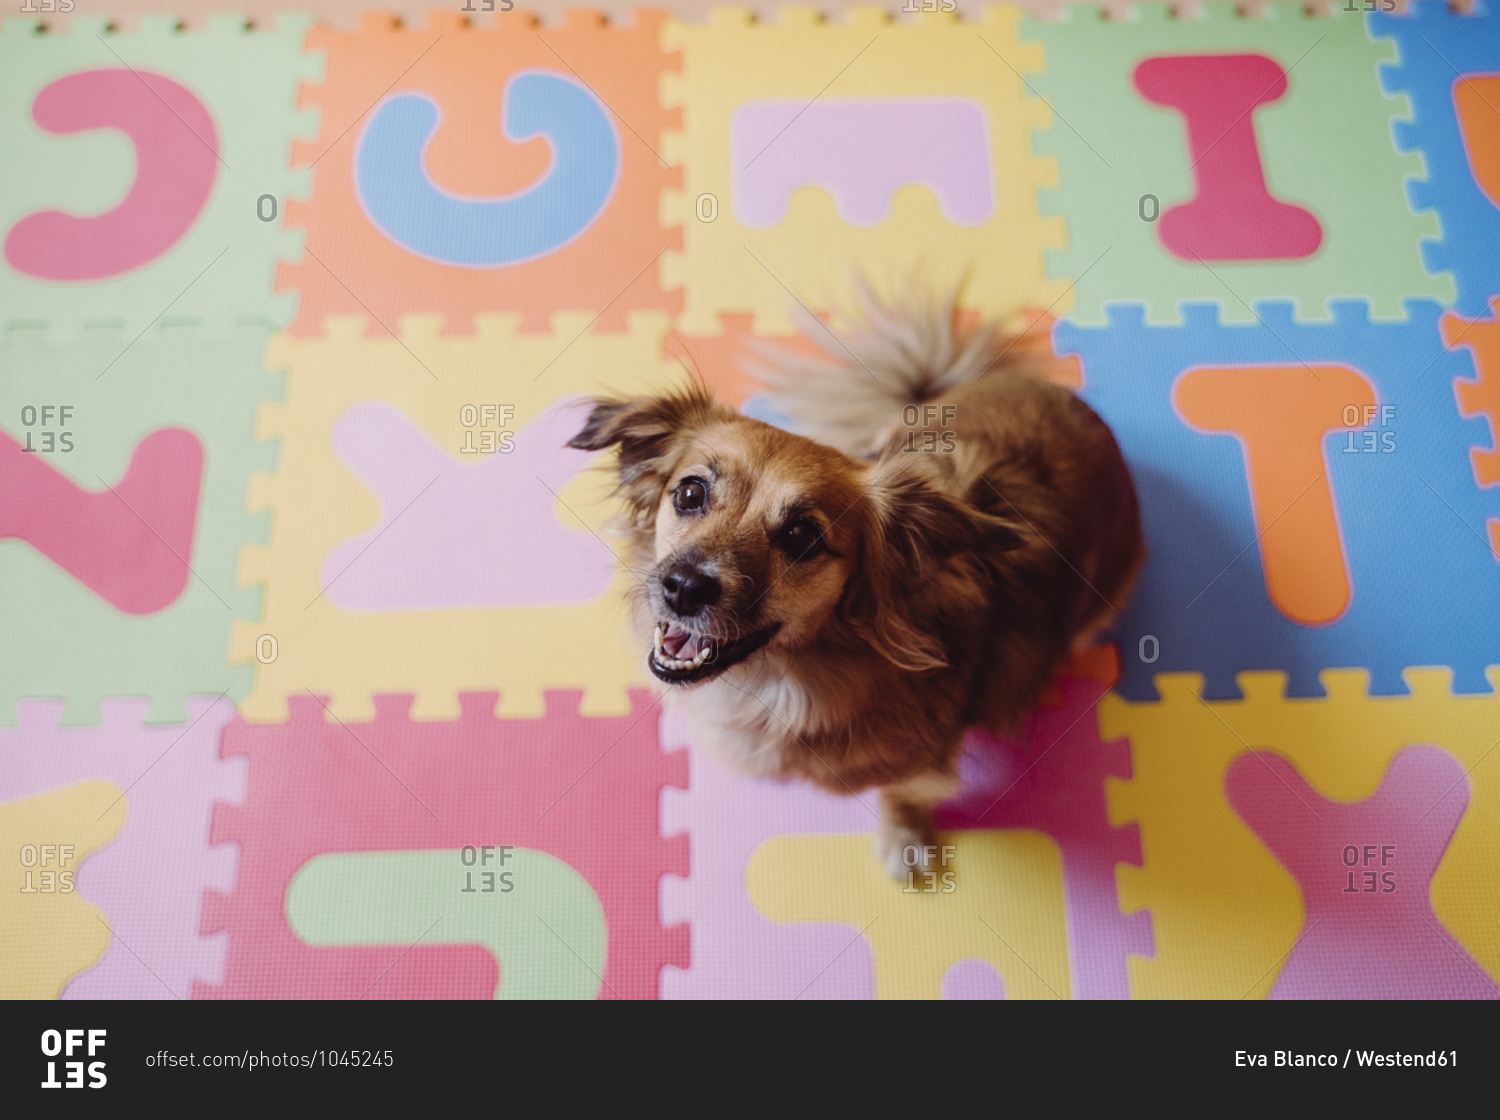 Cute dog sitting on colorful puzzle playmat